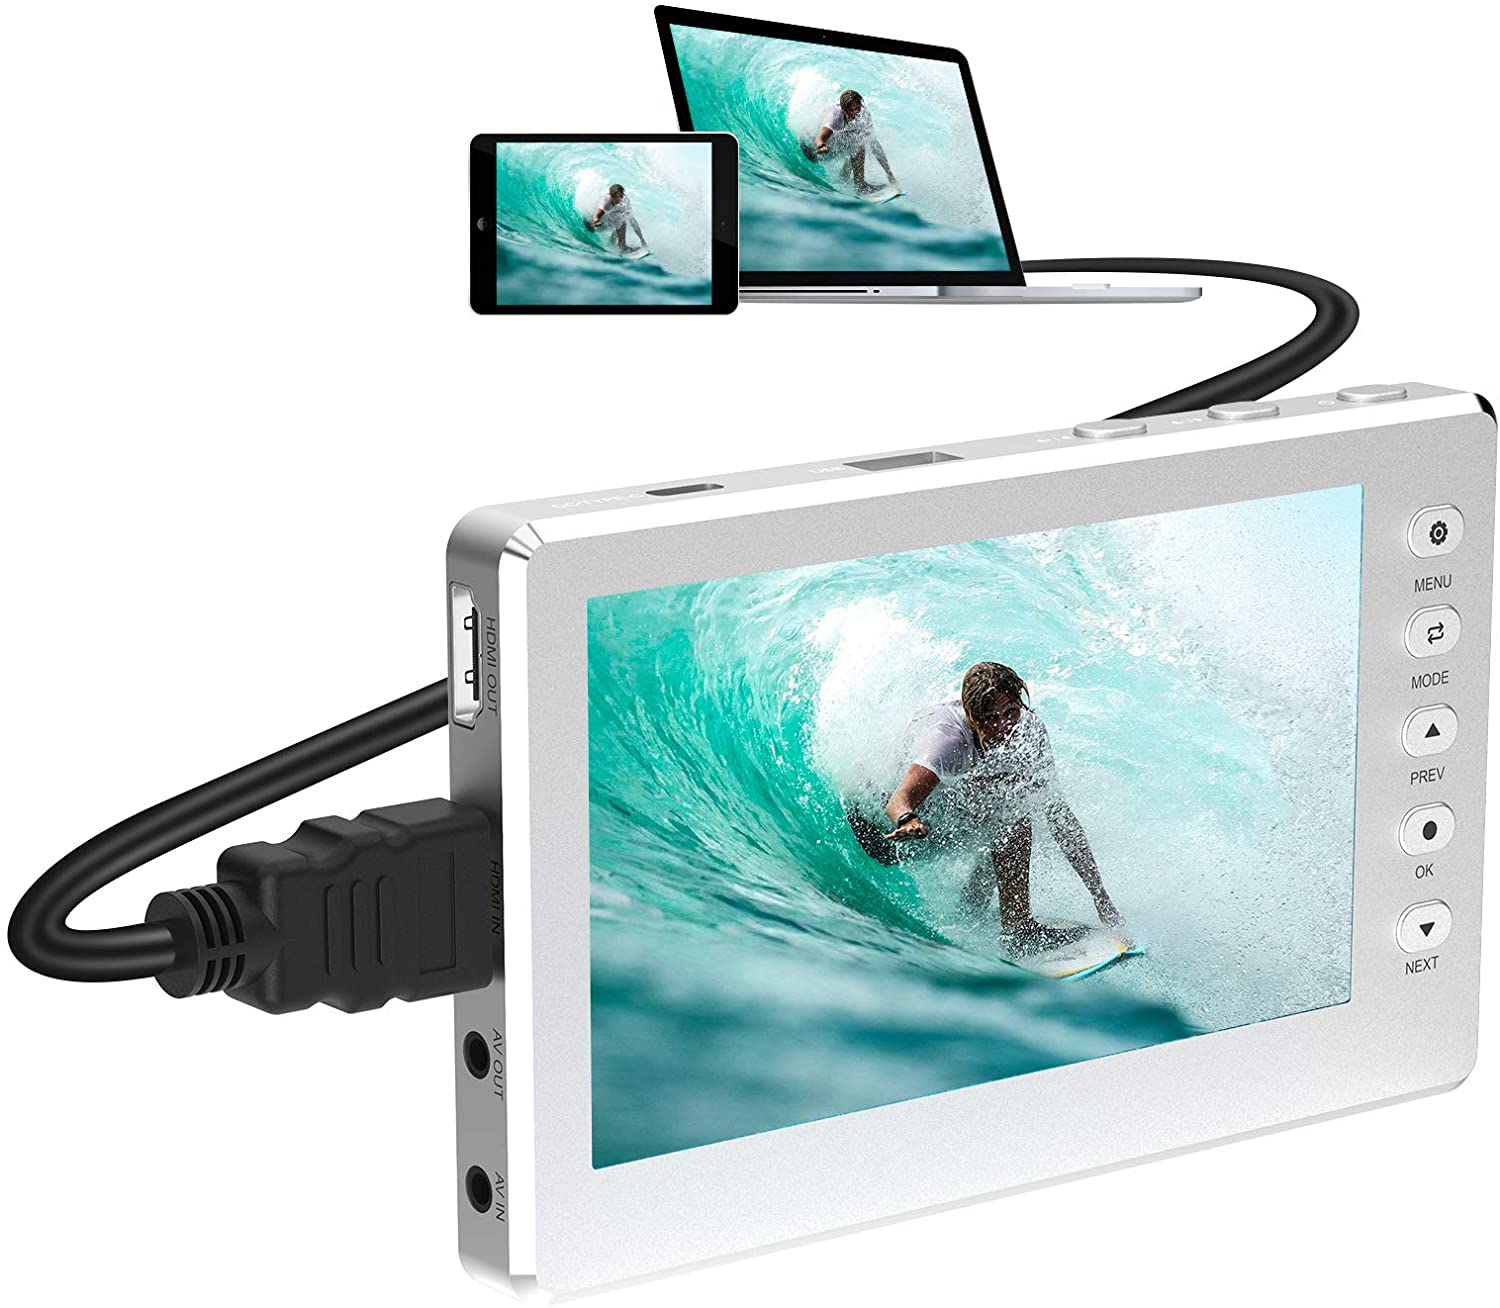 HD Video Capture Box 1080P 60FPS USB 2.0 with 5" OLED Screen Silver